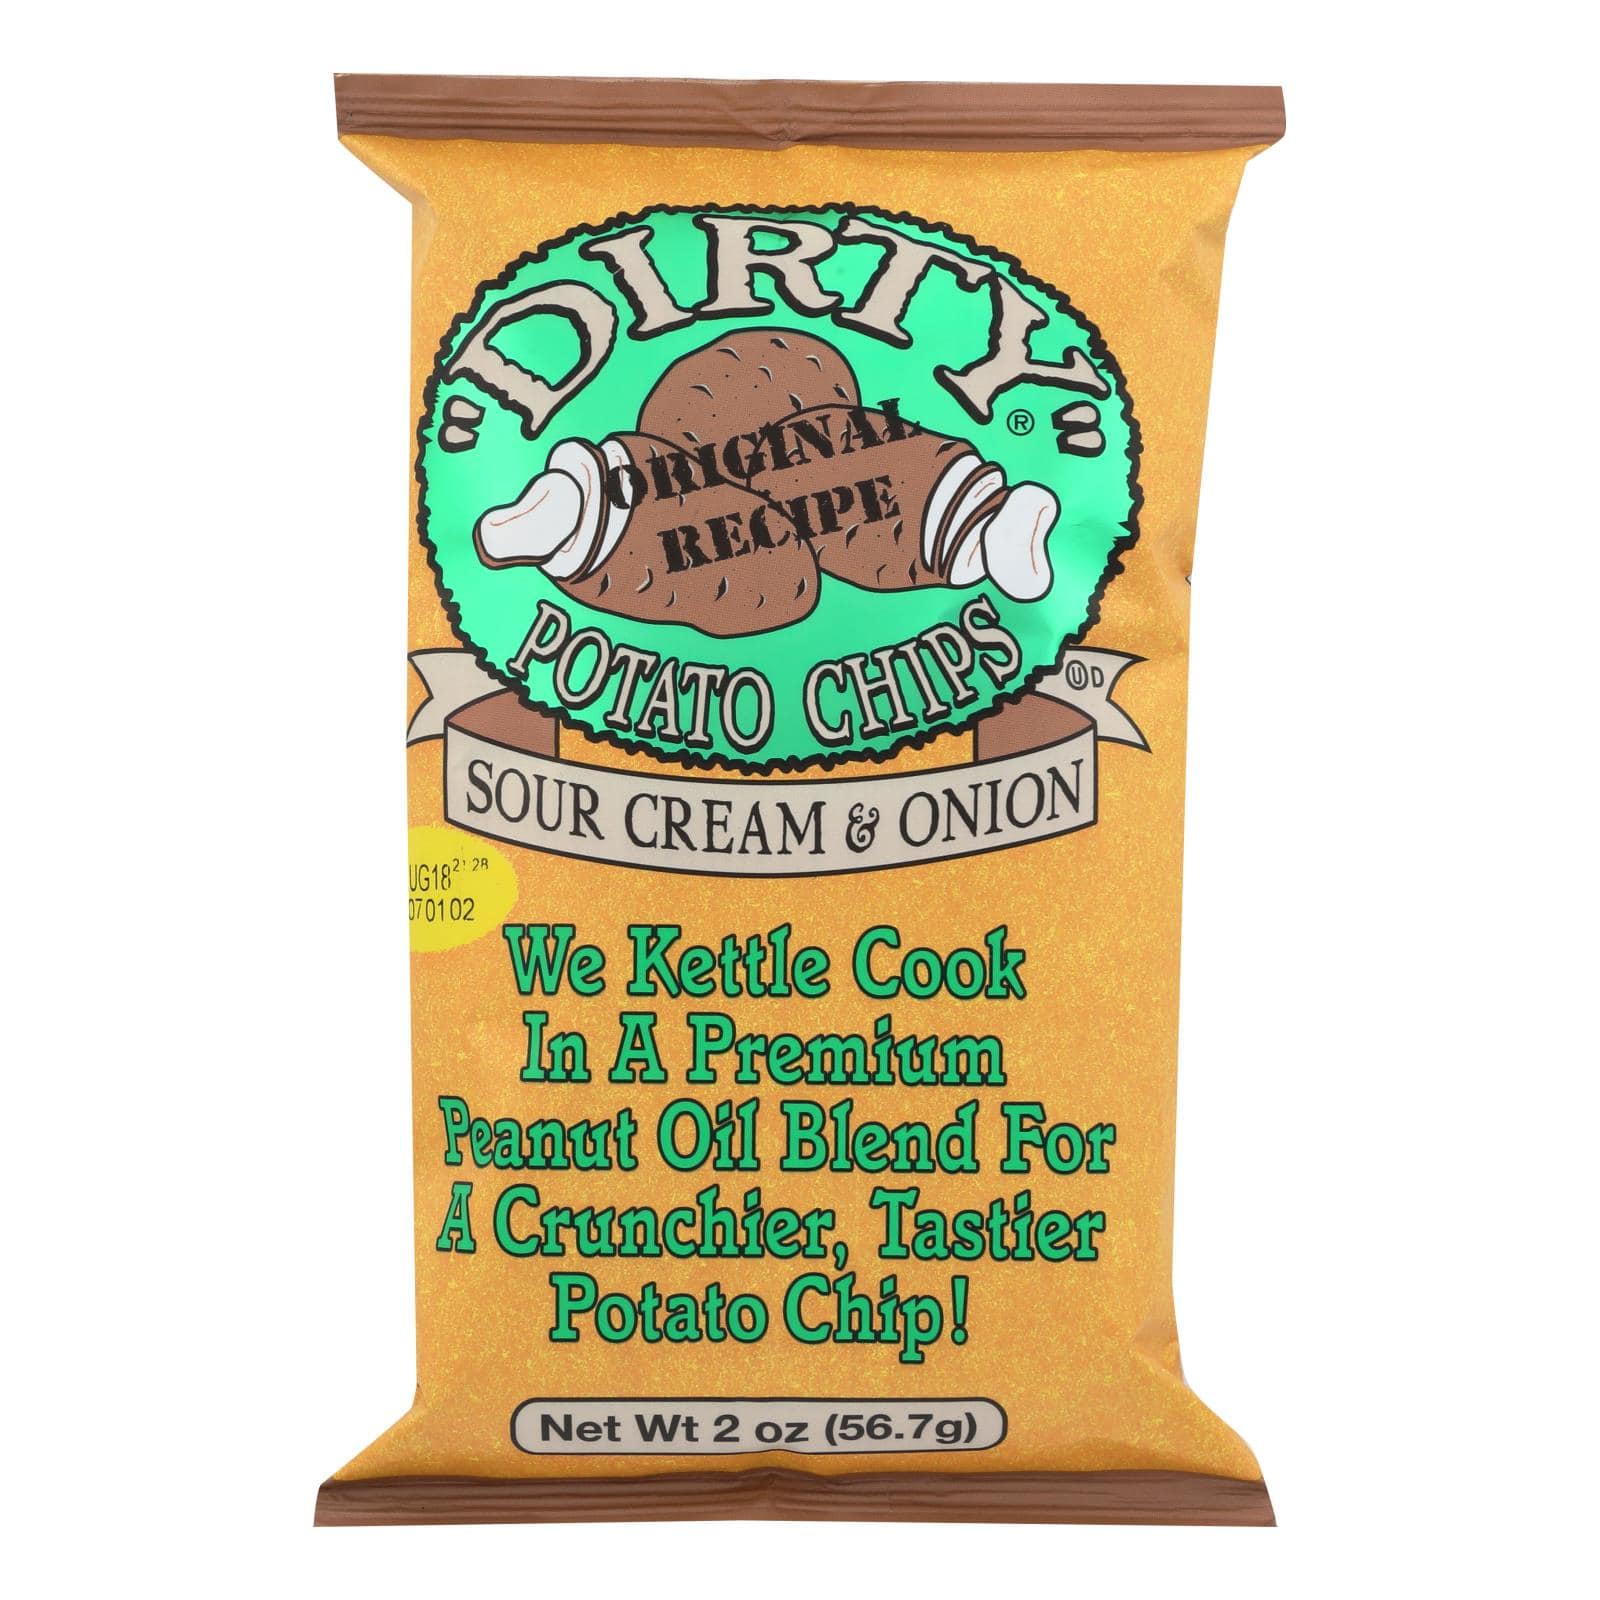 Buy Dirty Chips - Potato Chips - Sour Cream And Onion - Case Of 25 - 2 Oz.  at OnlyNaturals.us